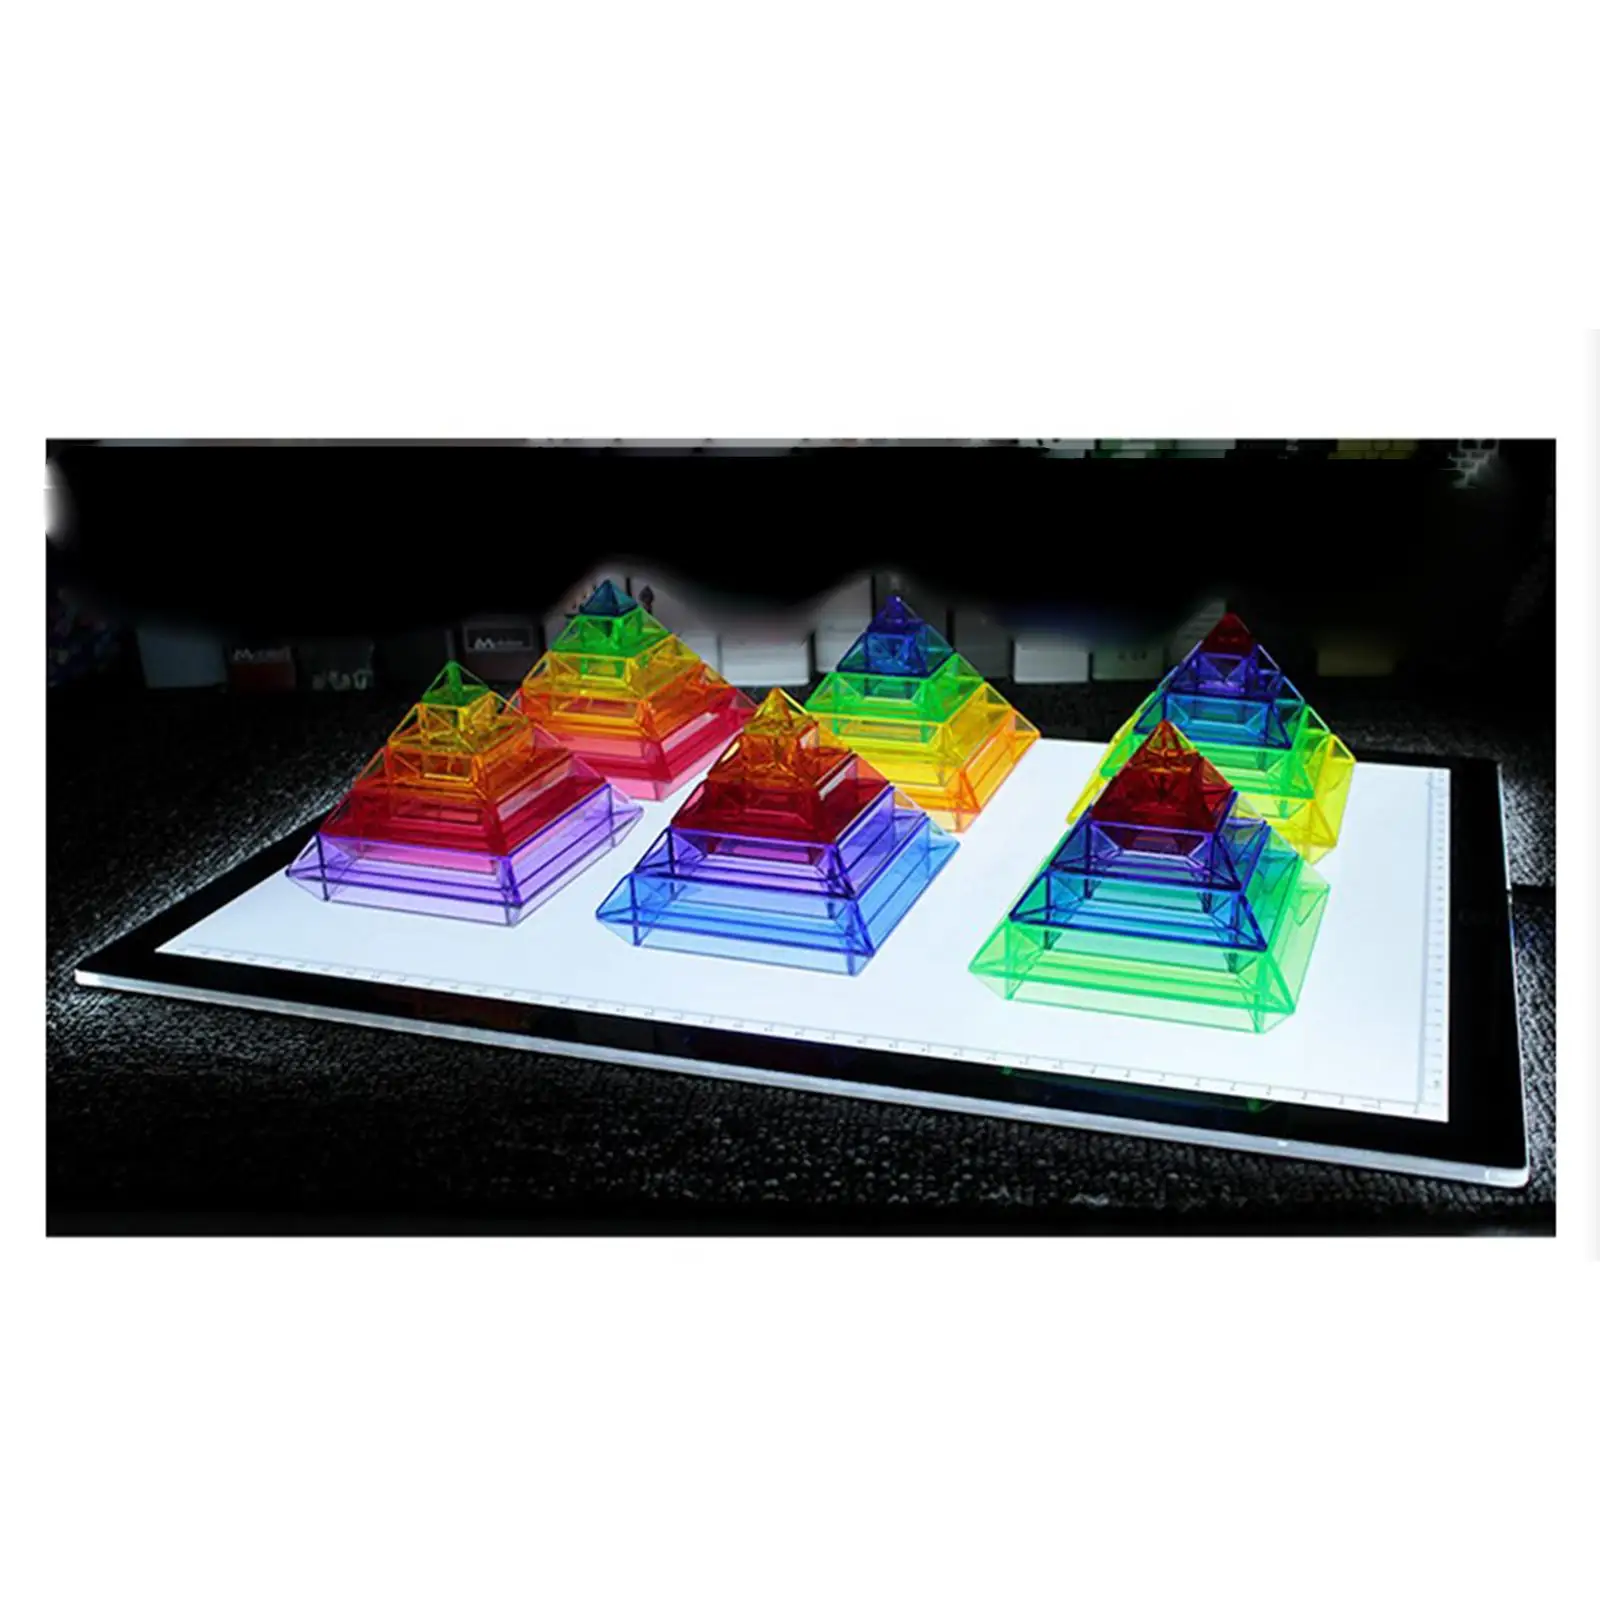 Transparent Pyramid  Toys Tower Puzzles  Coordination Stacking Creative Ability for Children